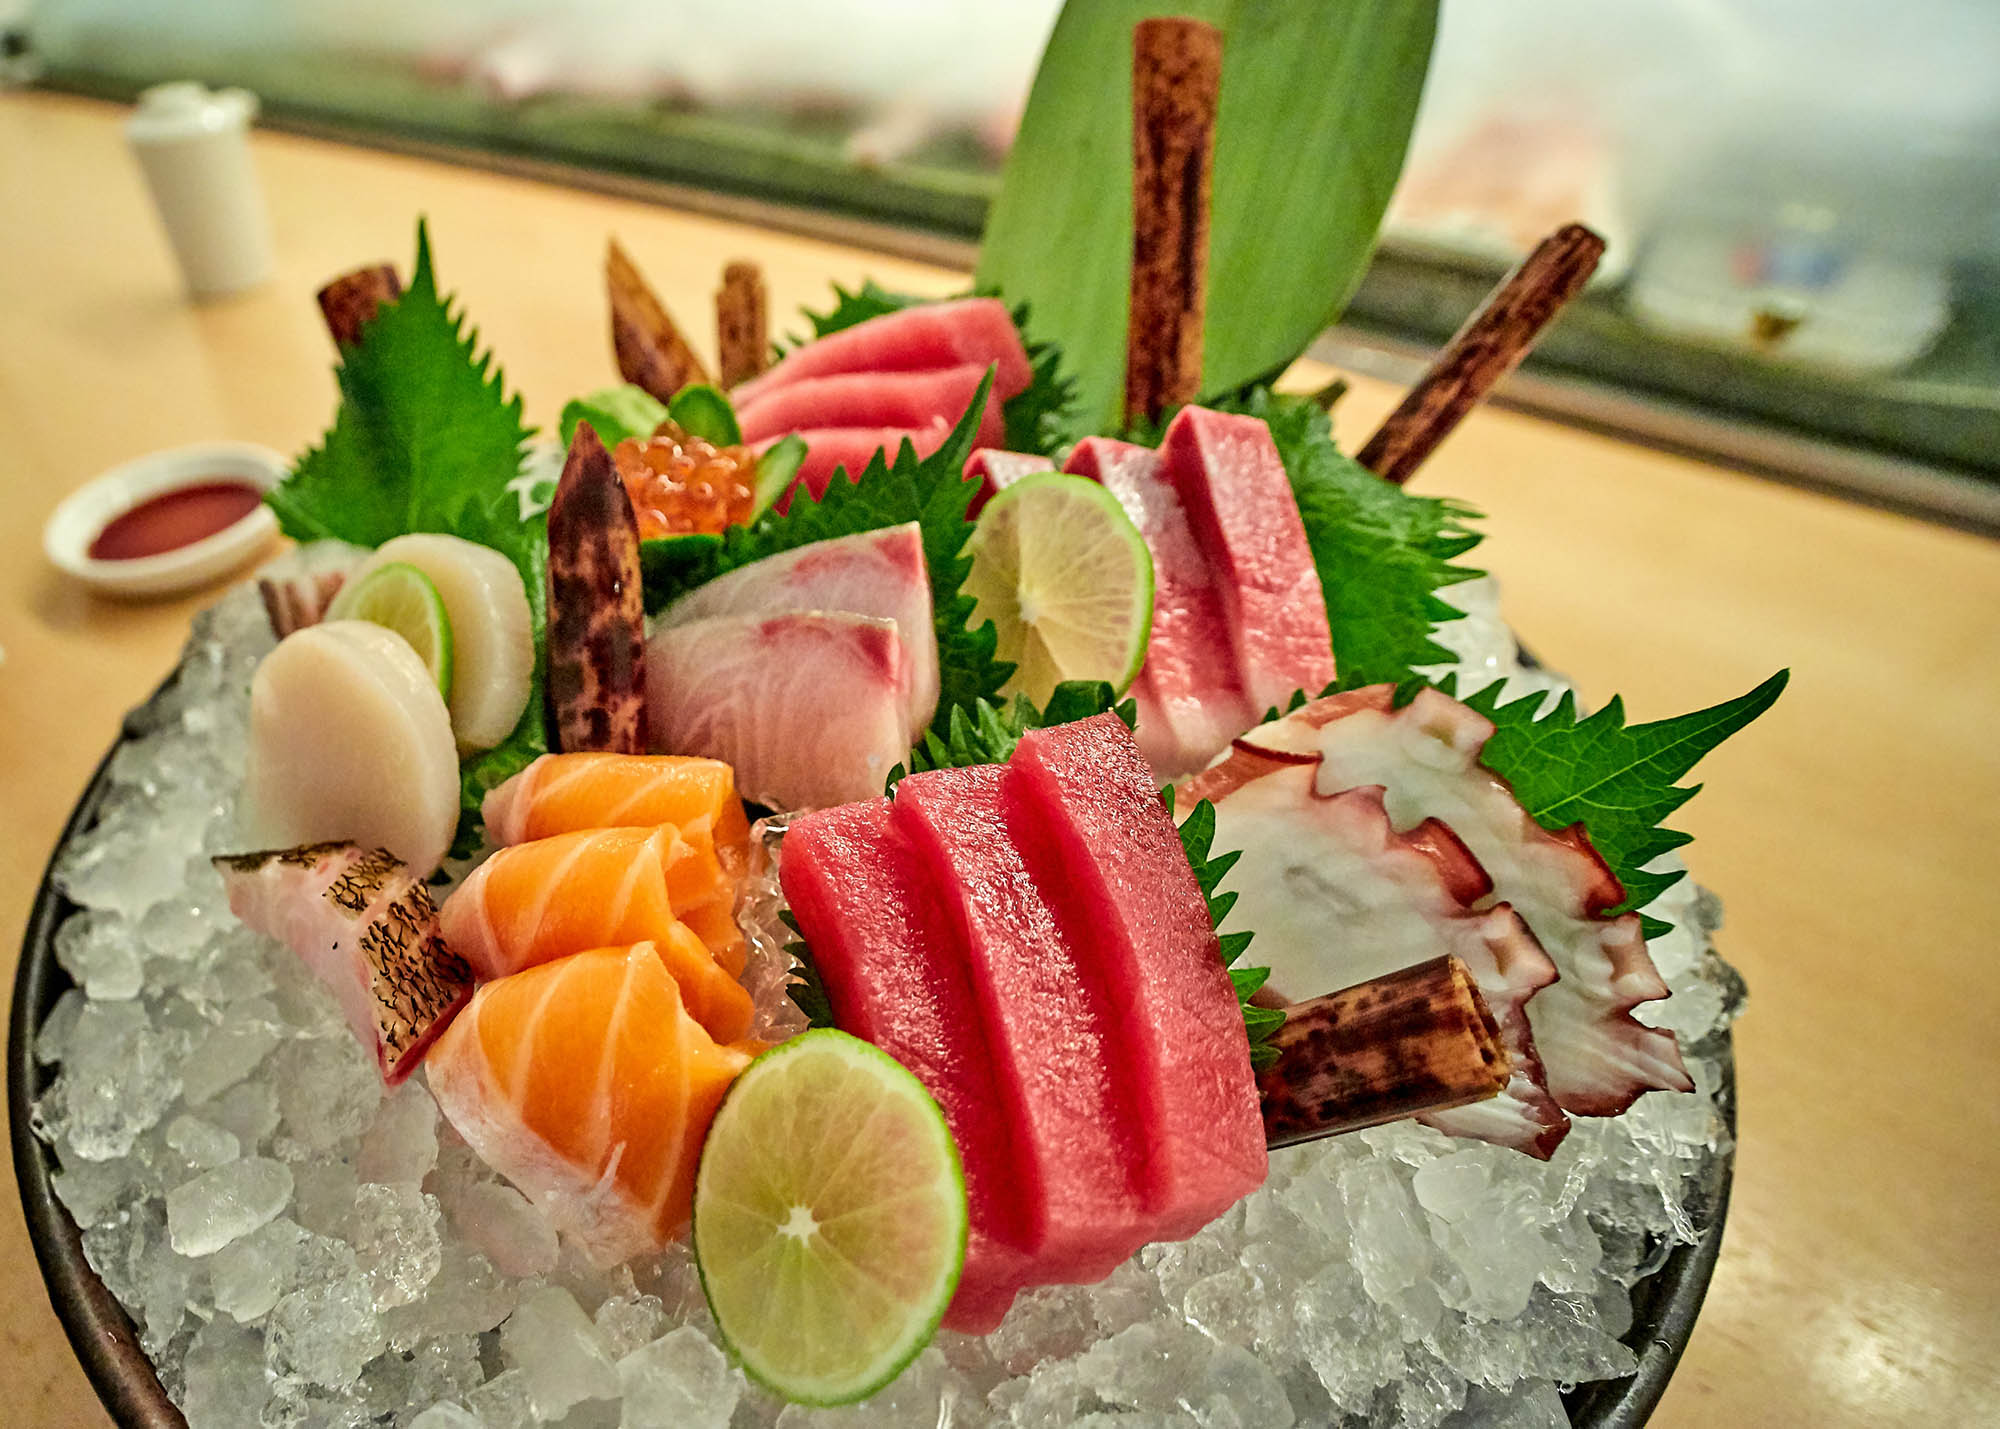 How to Select Sushi Grade Fish and Cut Sashimi the Right Way